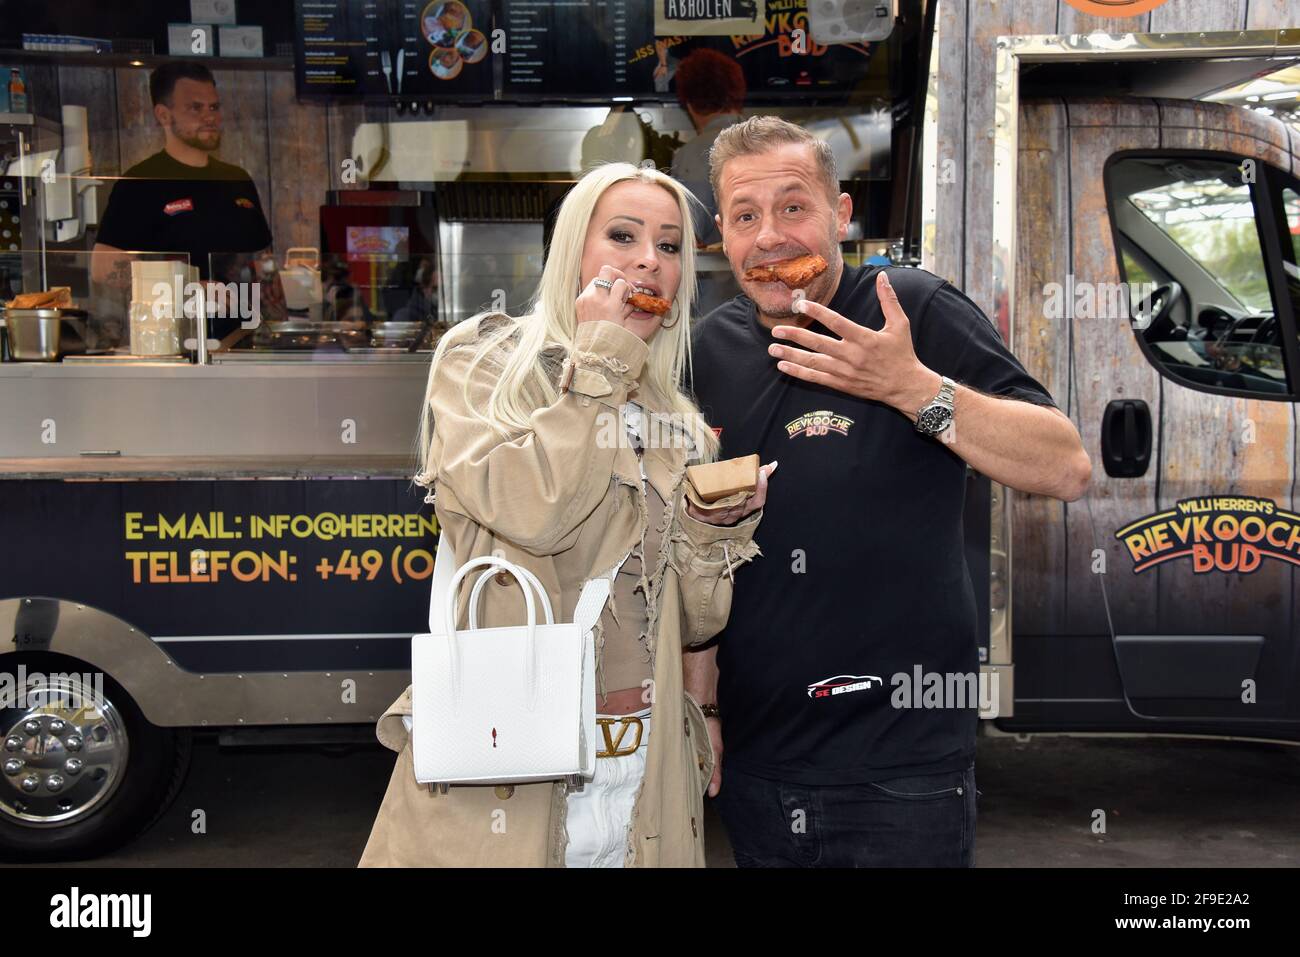 Frechen, Germany. 16th Apr, 2021. Willi Herren and Cora Schumacher at the opening of 'Willi Herrens Rievkooche Bud', a food truck on the Selgros premises. Credit: Horst Galuschka/dpa/Alamy Live News Stock Photo